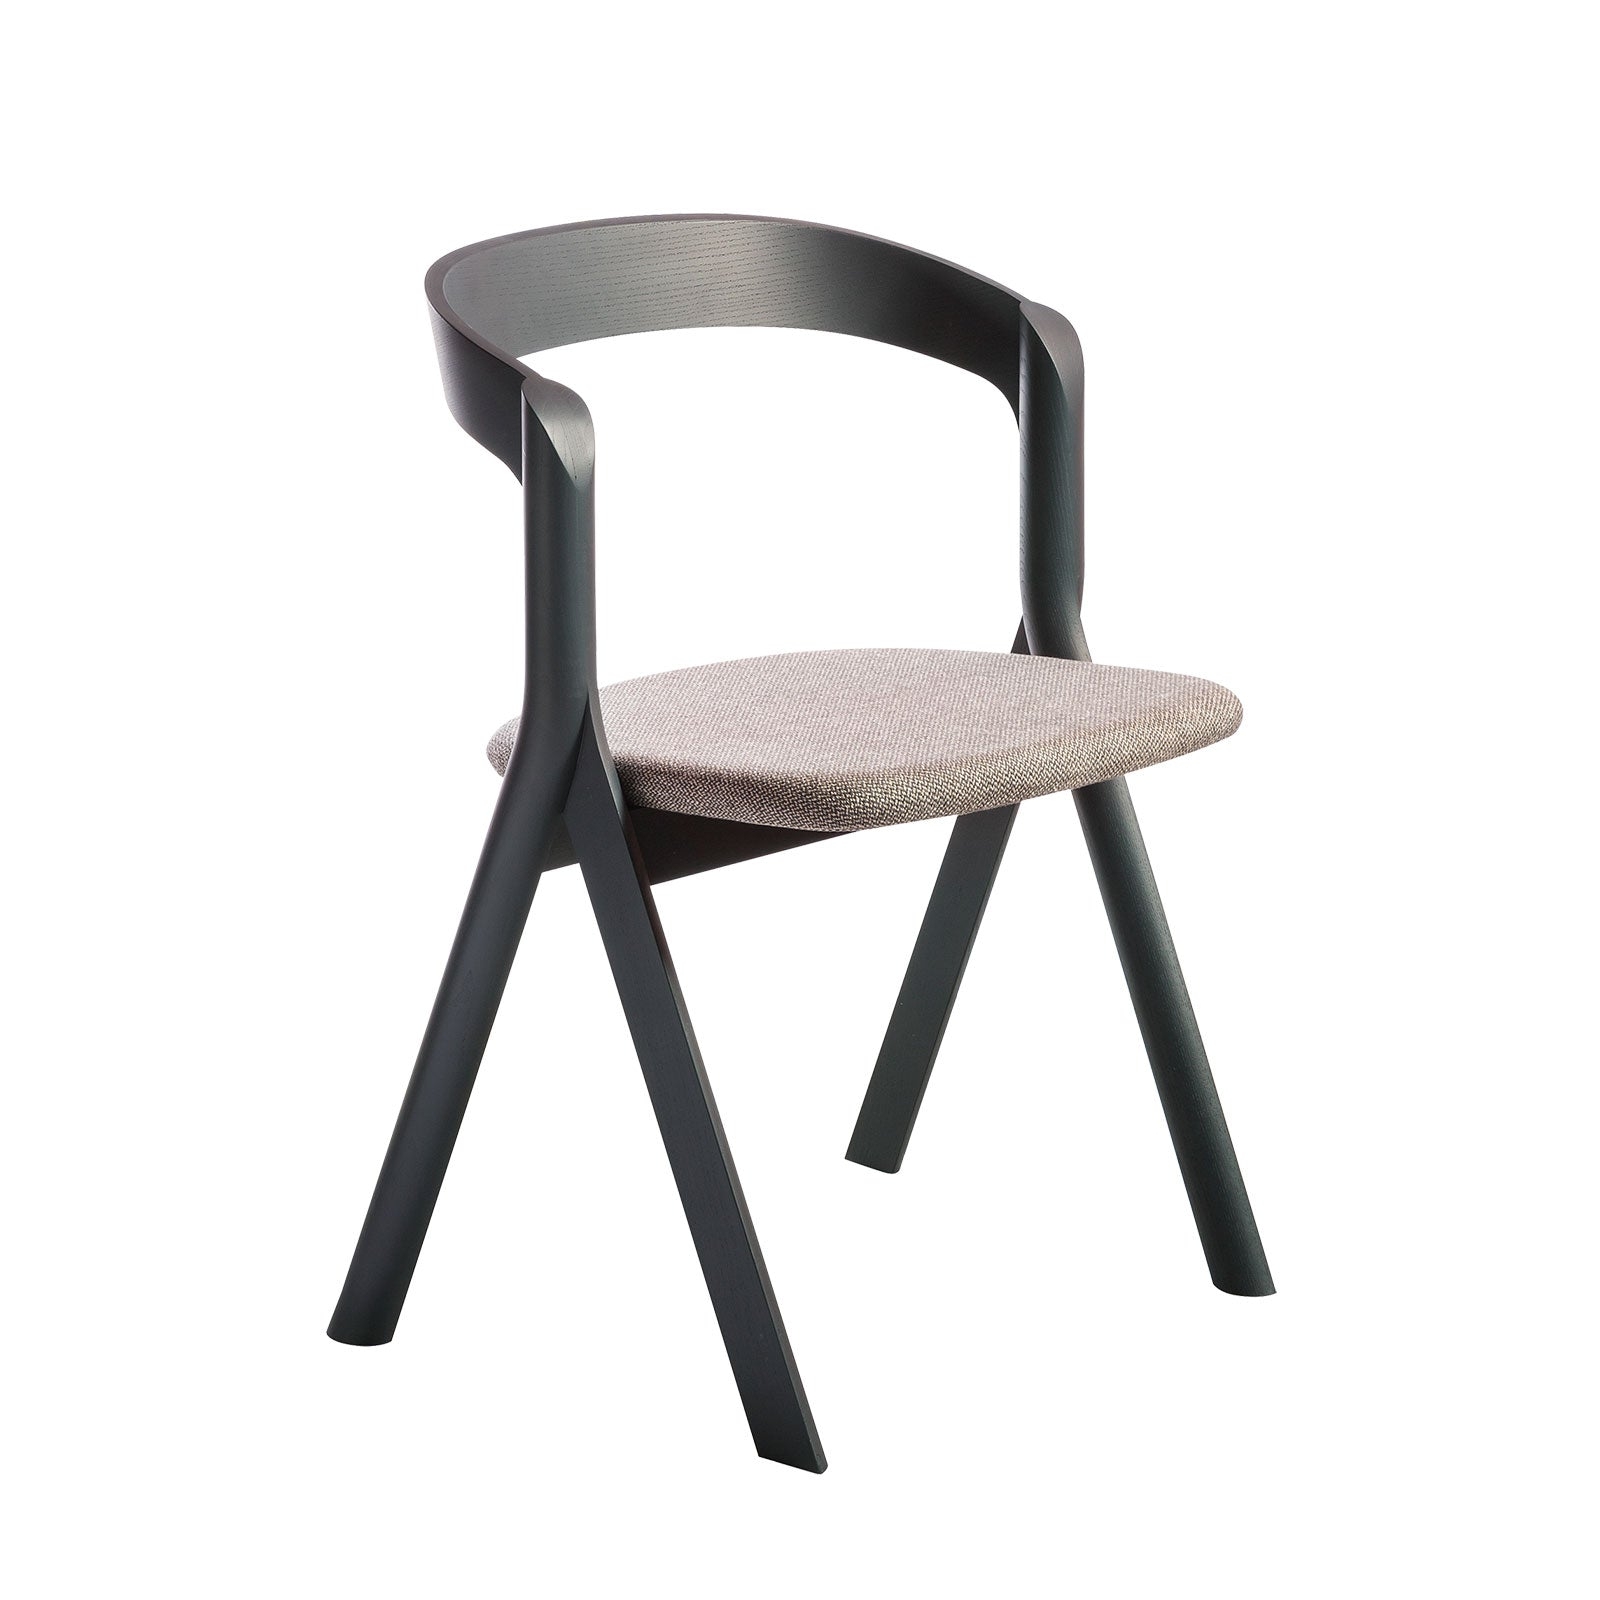 Diverge – Chair Ash Stained Walnut – Twins Dust Gray – Miniforms – Indor